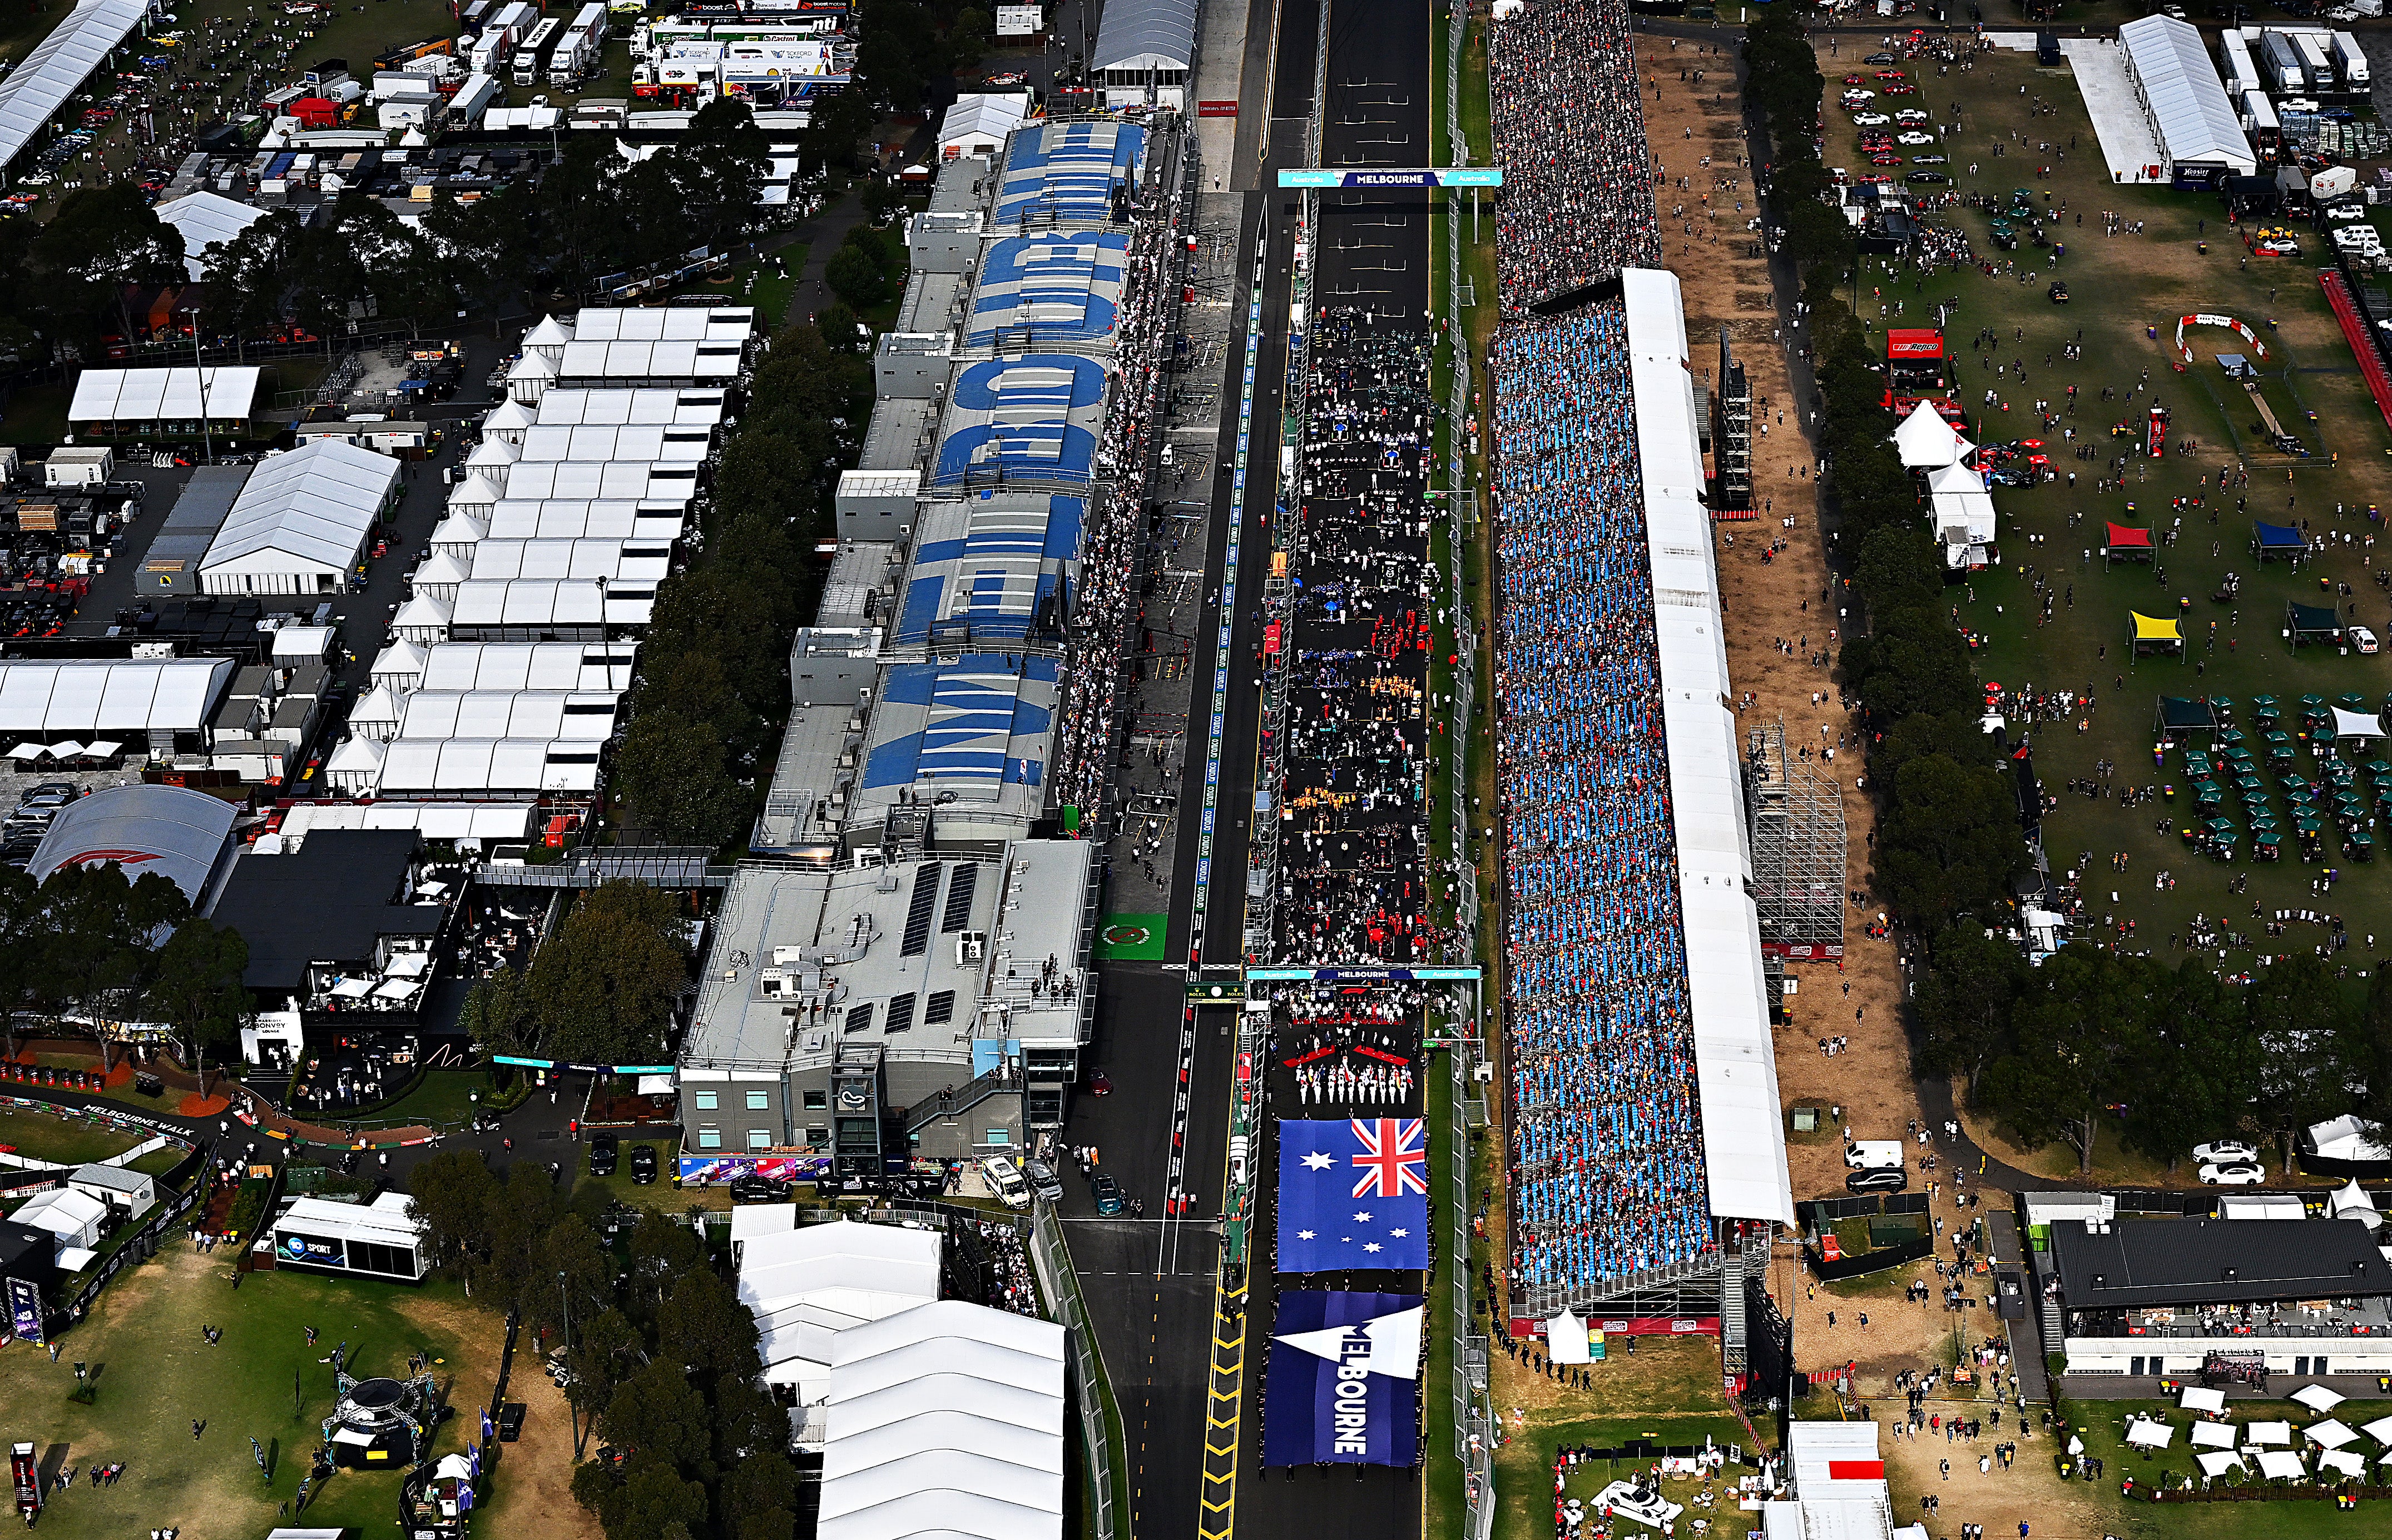 Albert Park in Melbourne hosts the third race of the 2023 F1 season